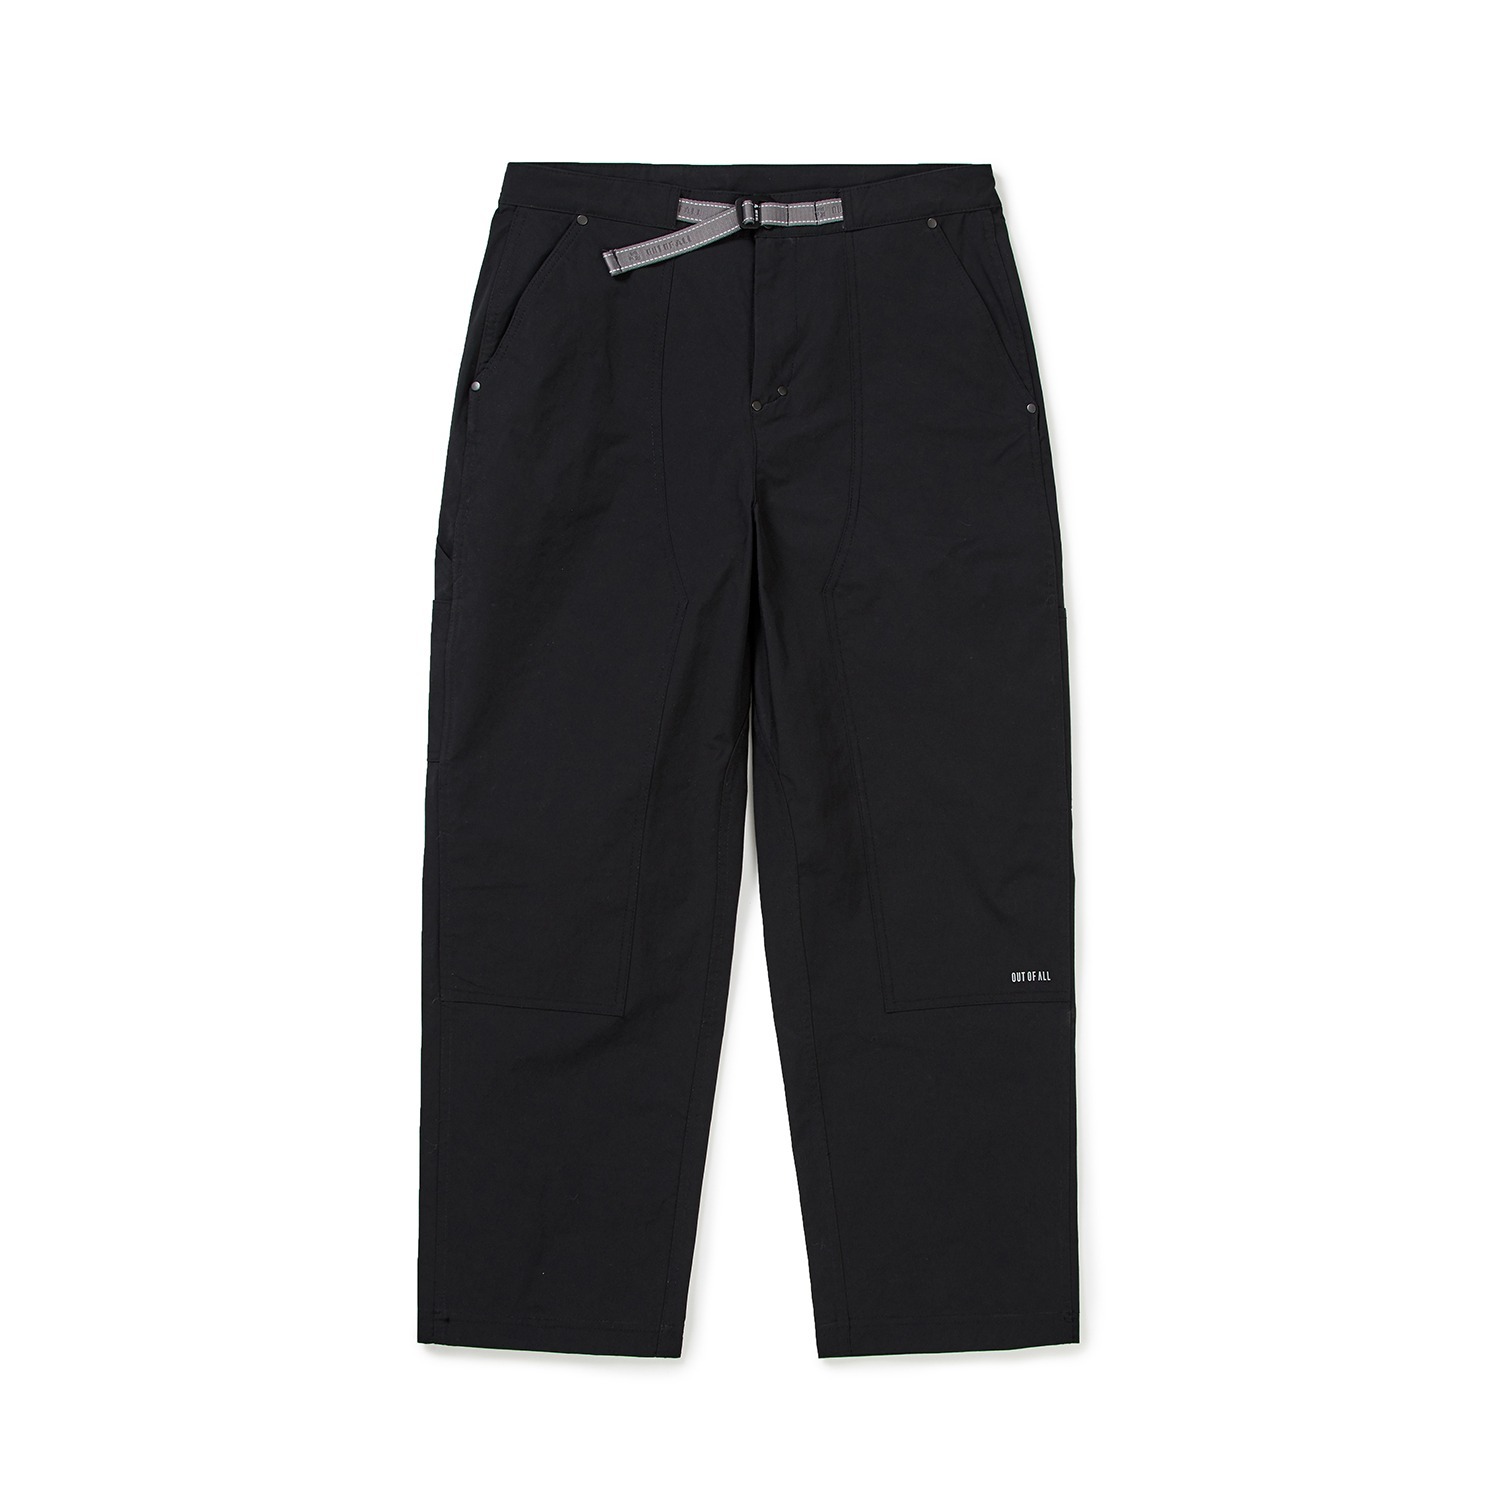 OUT OF ALL SOLOTEX WINTER DOUBLE KNEE PANTS-BLACK[아웃오브올 솔로텍스 윈터 더블 니 팬츠-블랙]